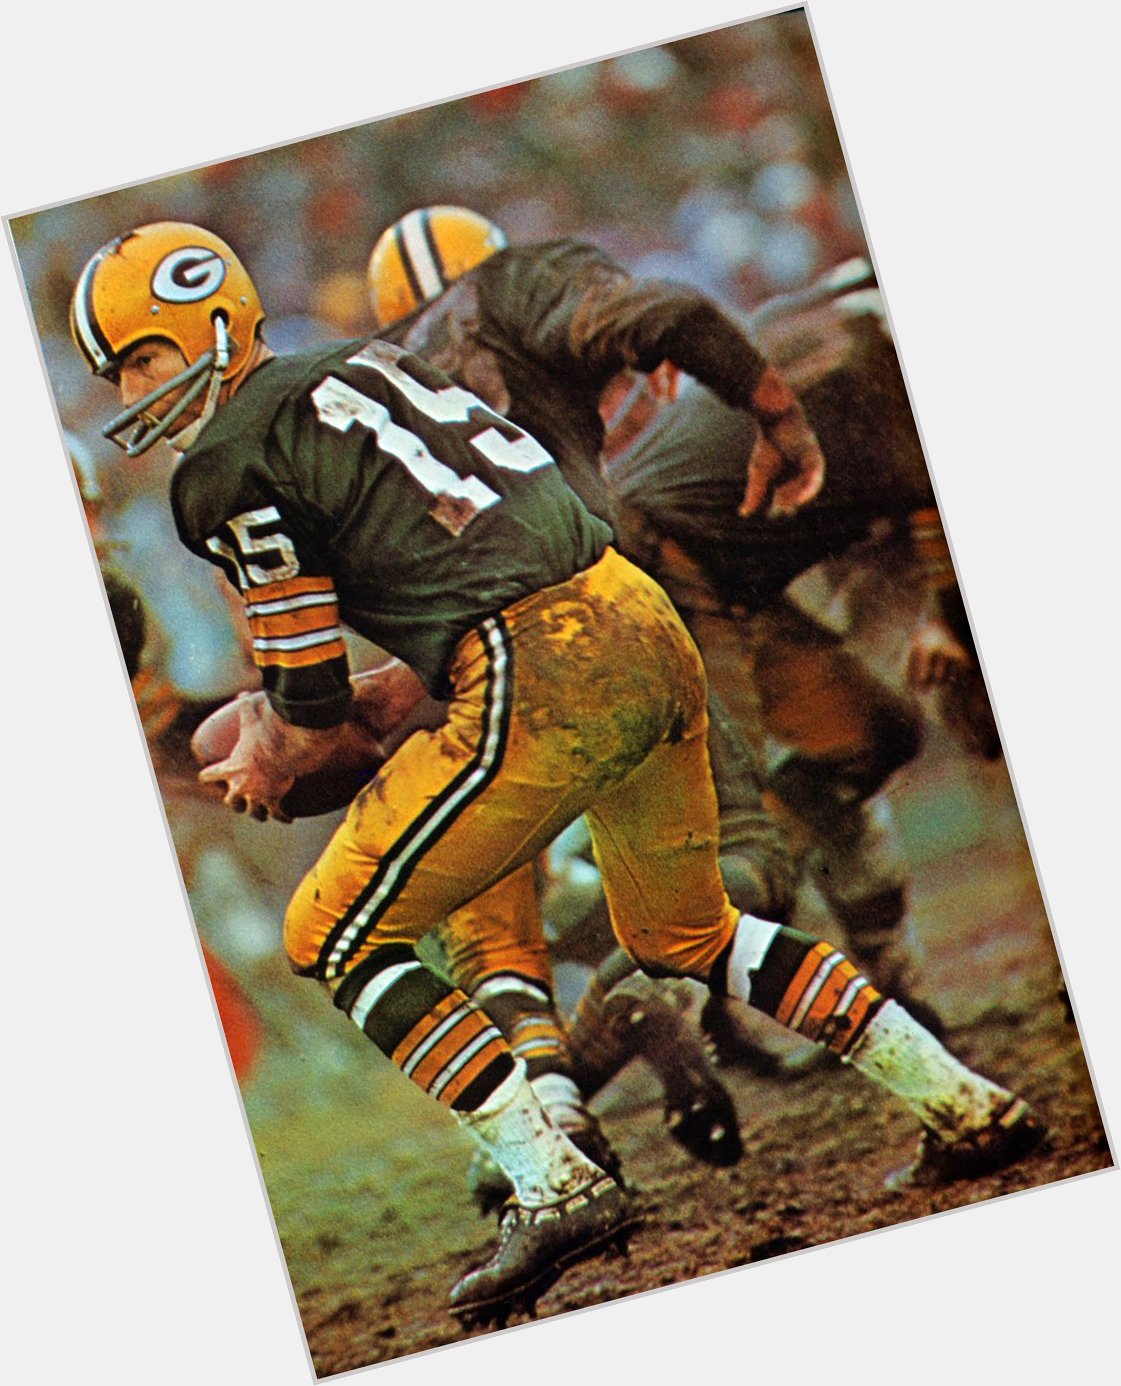 Happy birthday today to QB Bart Starr, who turns 81 today. 